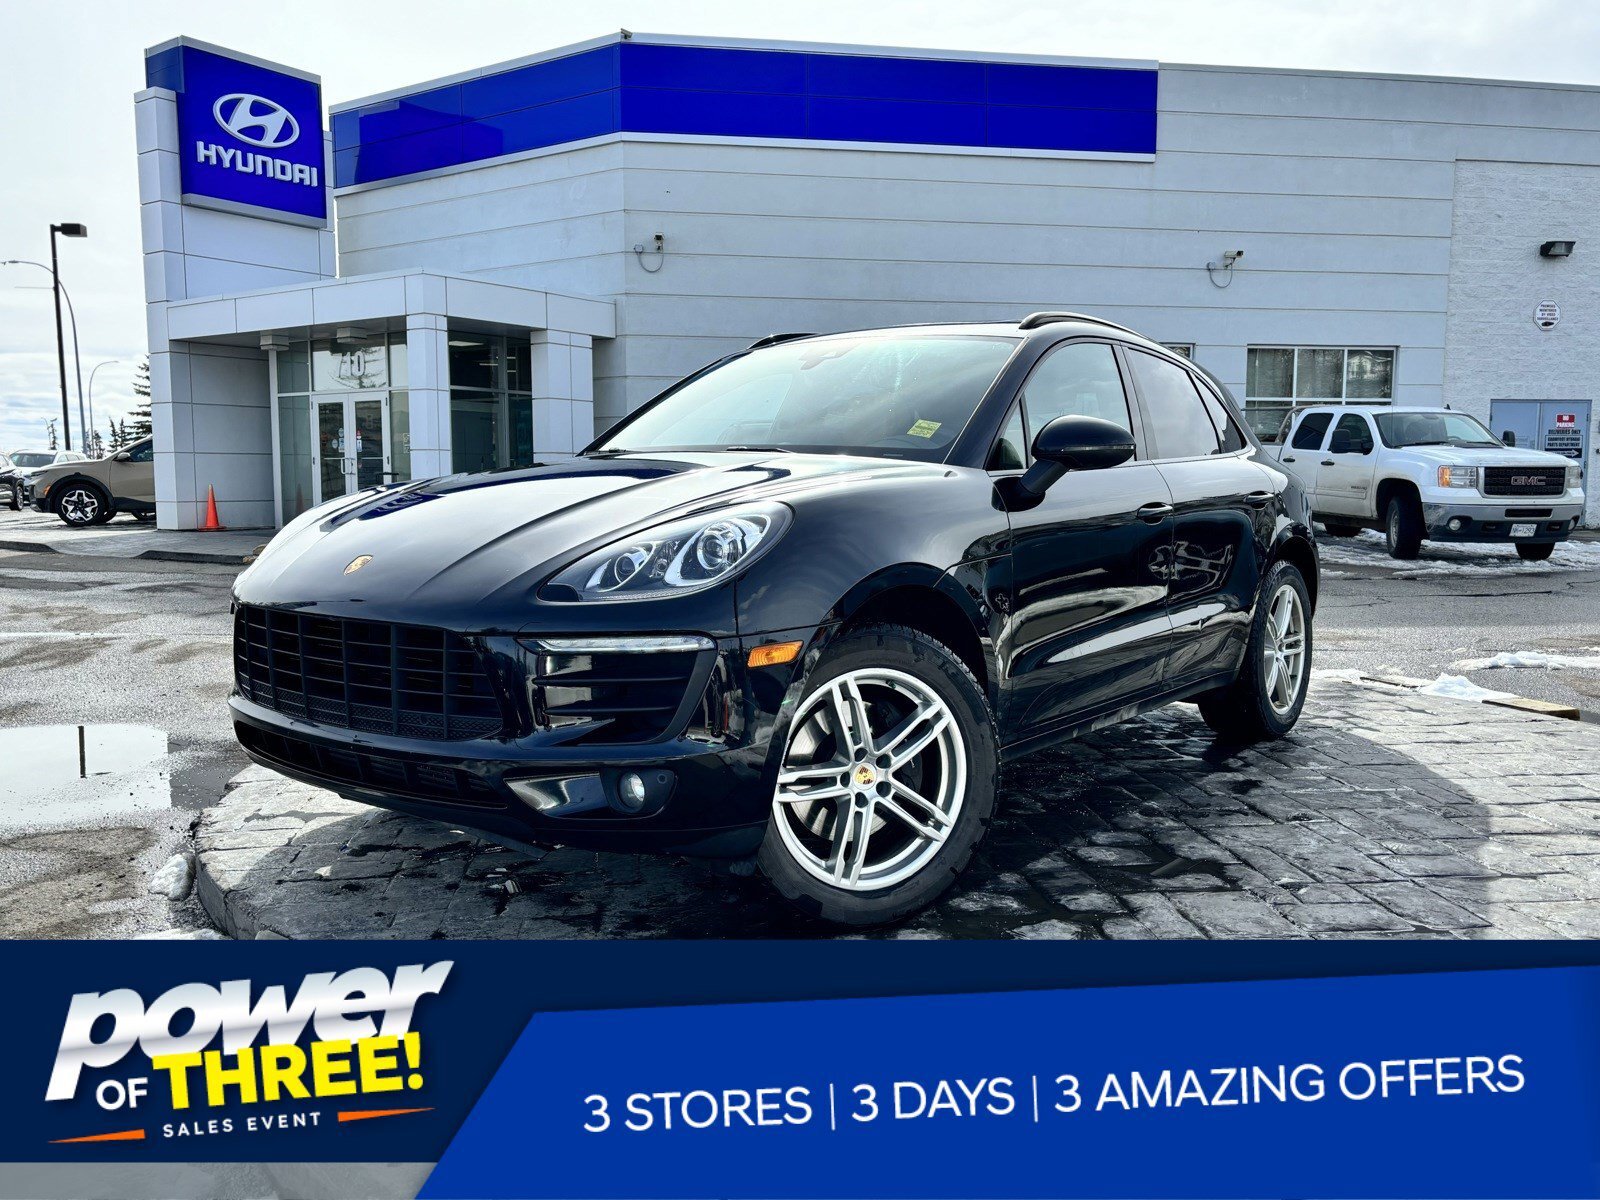 2018 Porsche Macan - AWD, No Accidents, Turbo, Lane Departure Warning